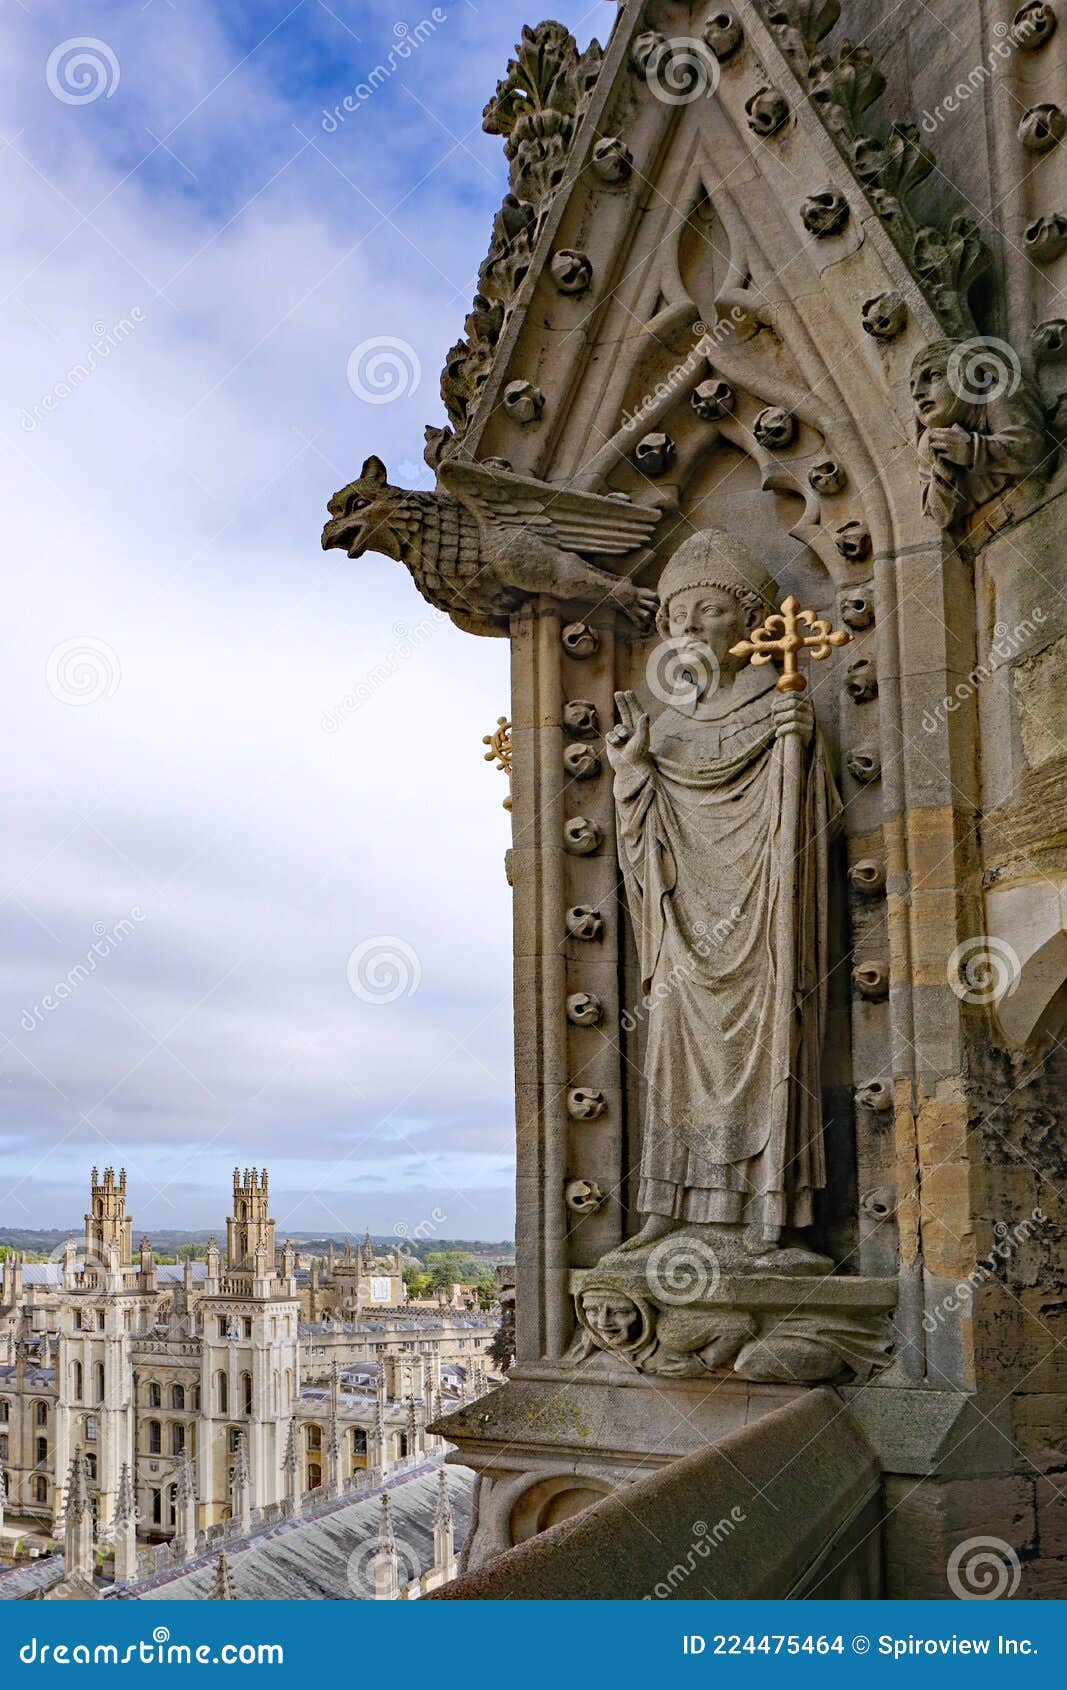 stone gargoyle and carving of an archbishop dating from the 13th century, oxford university